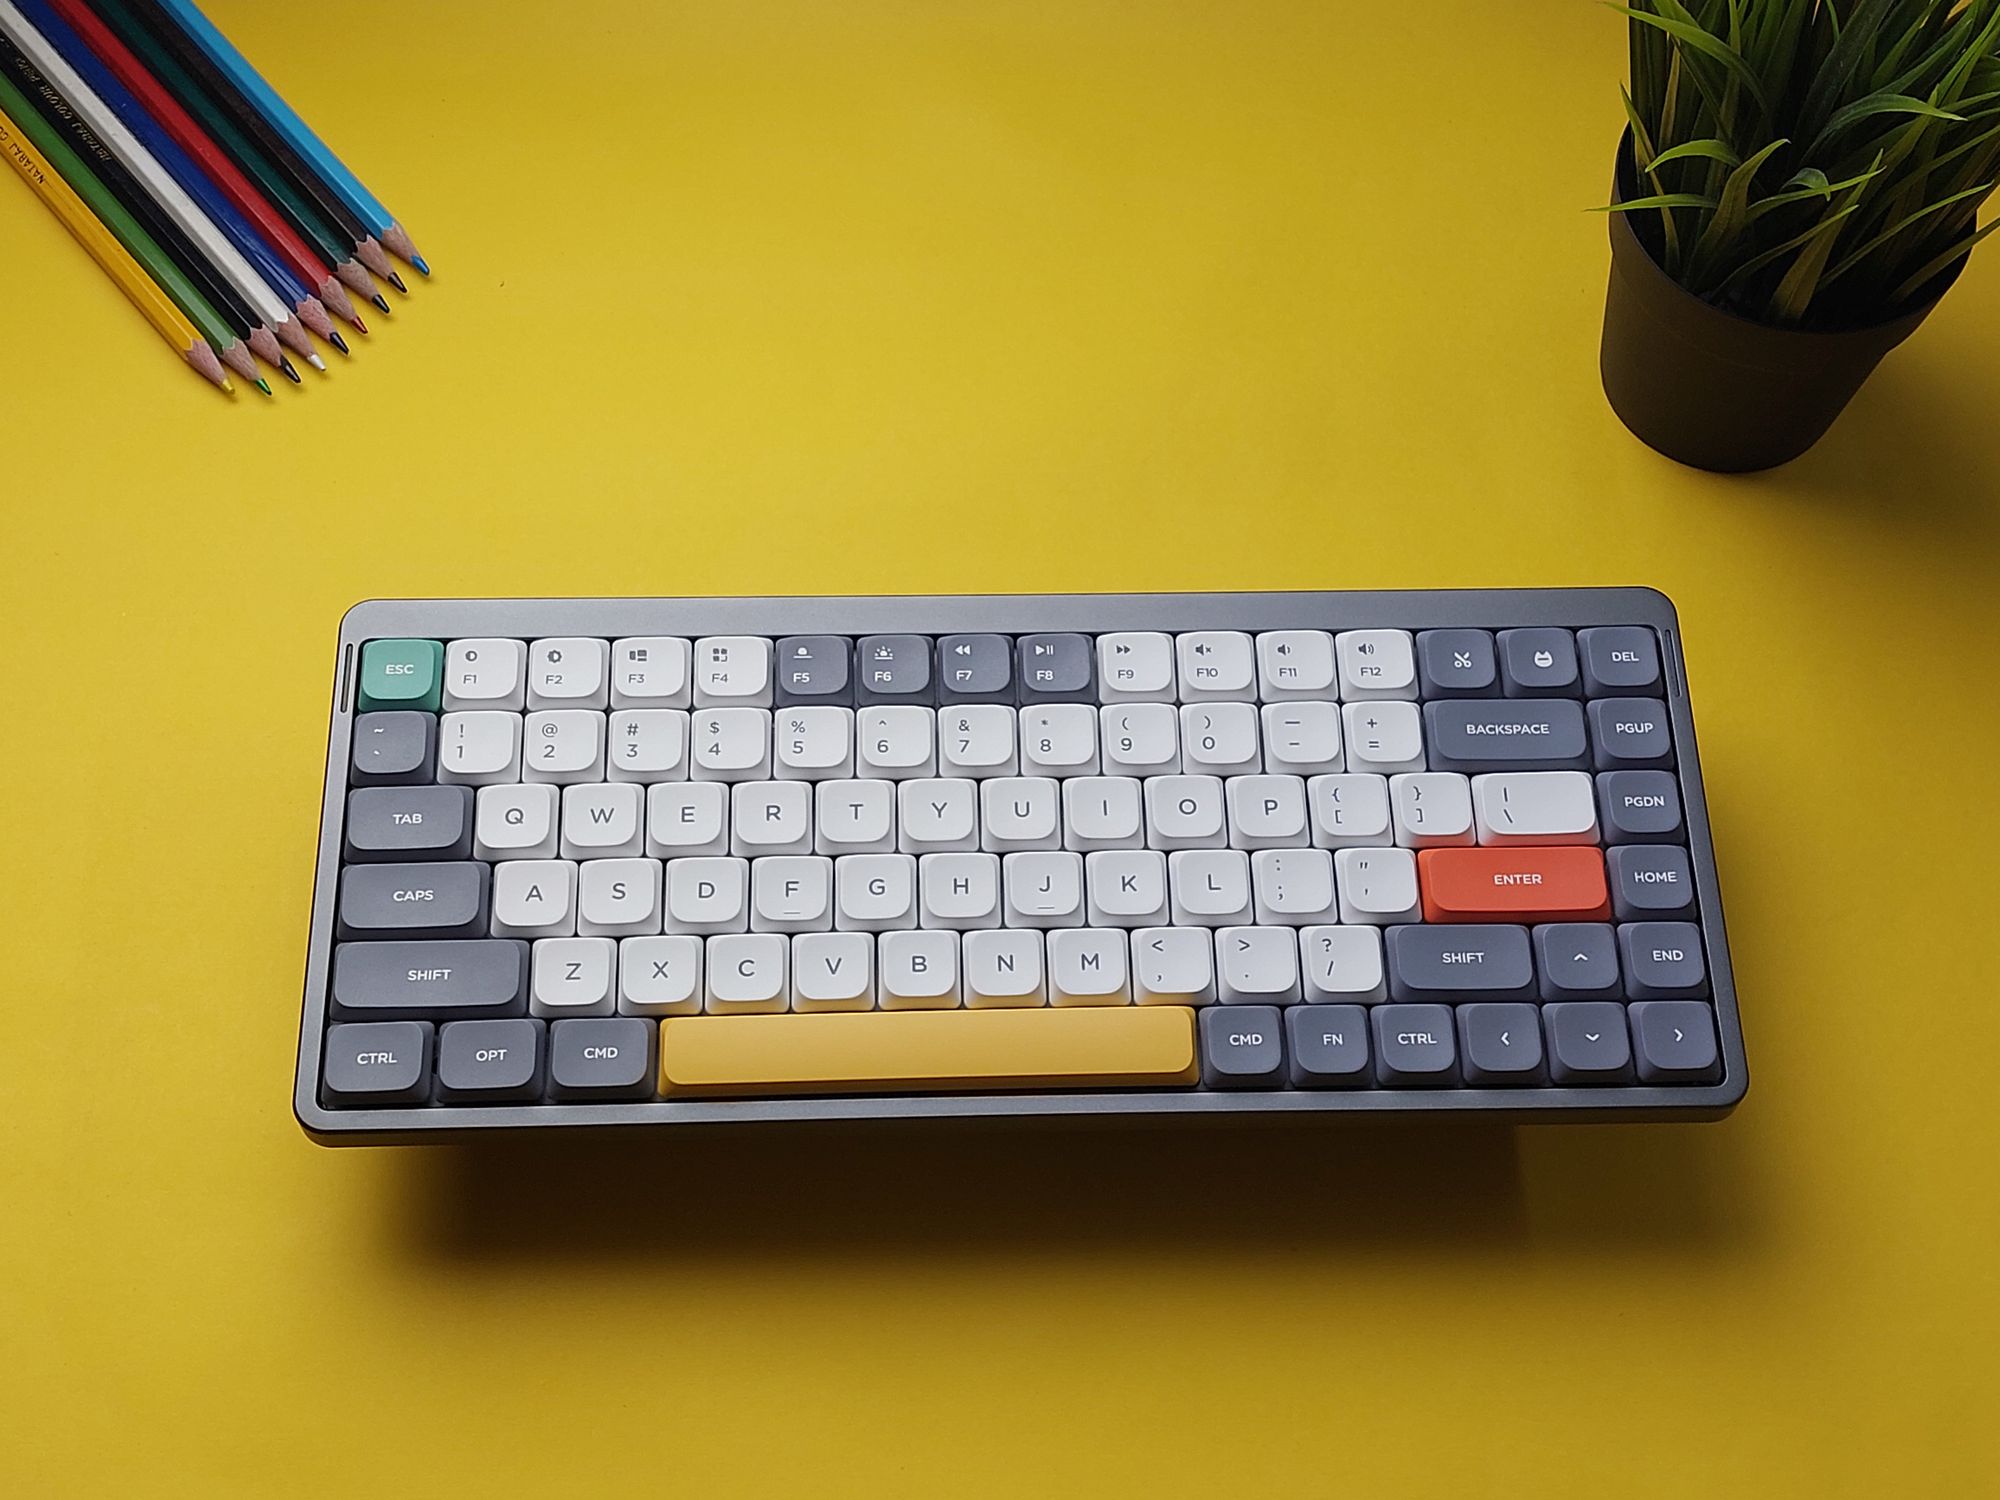 NuPhy Air 75 Review- My new favorite mechanical keyboard